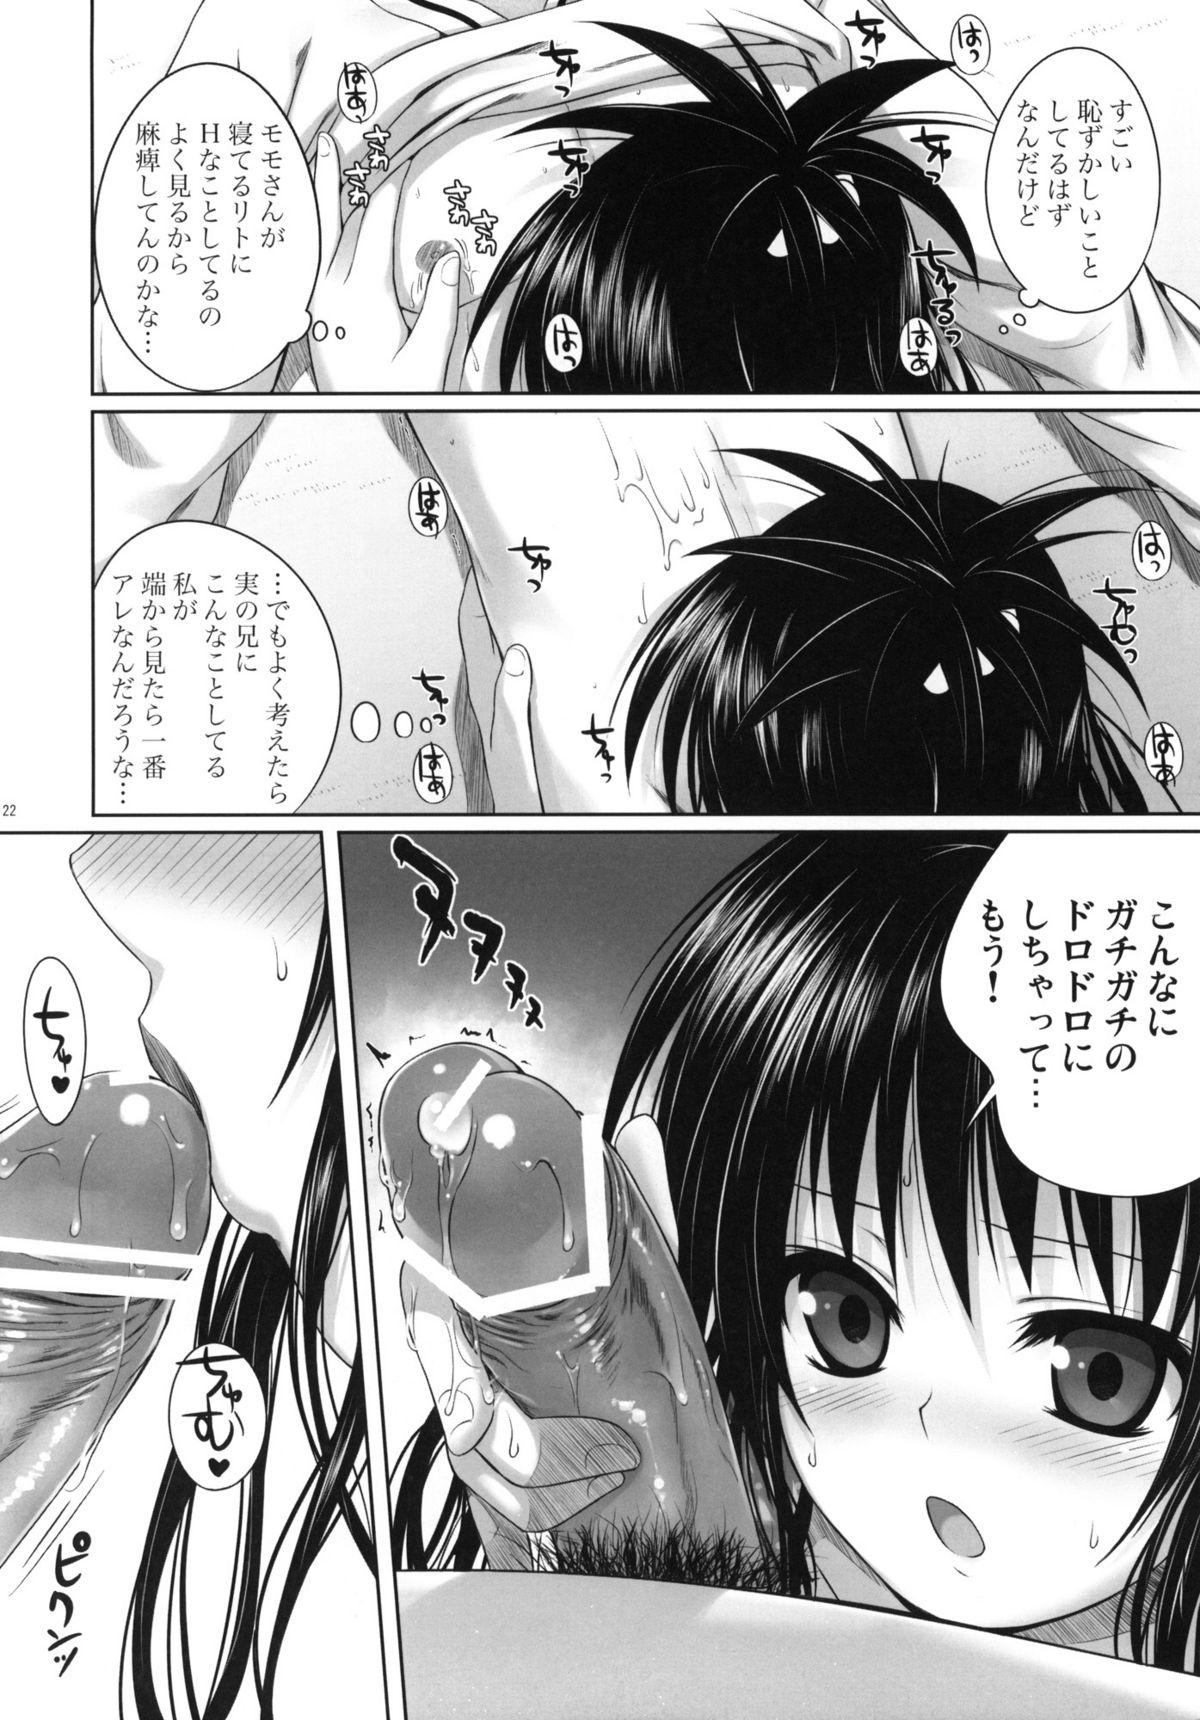 Mikan's delusion, and usual days 20